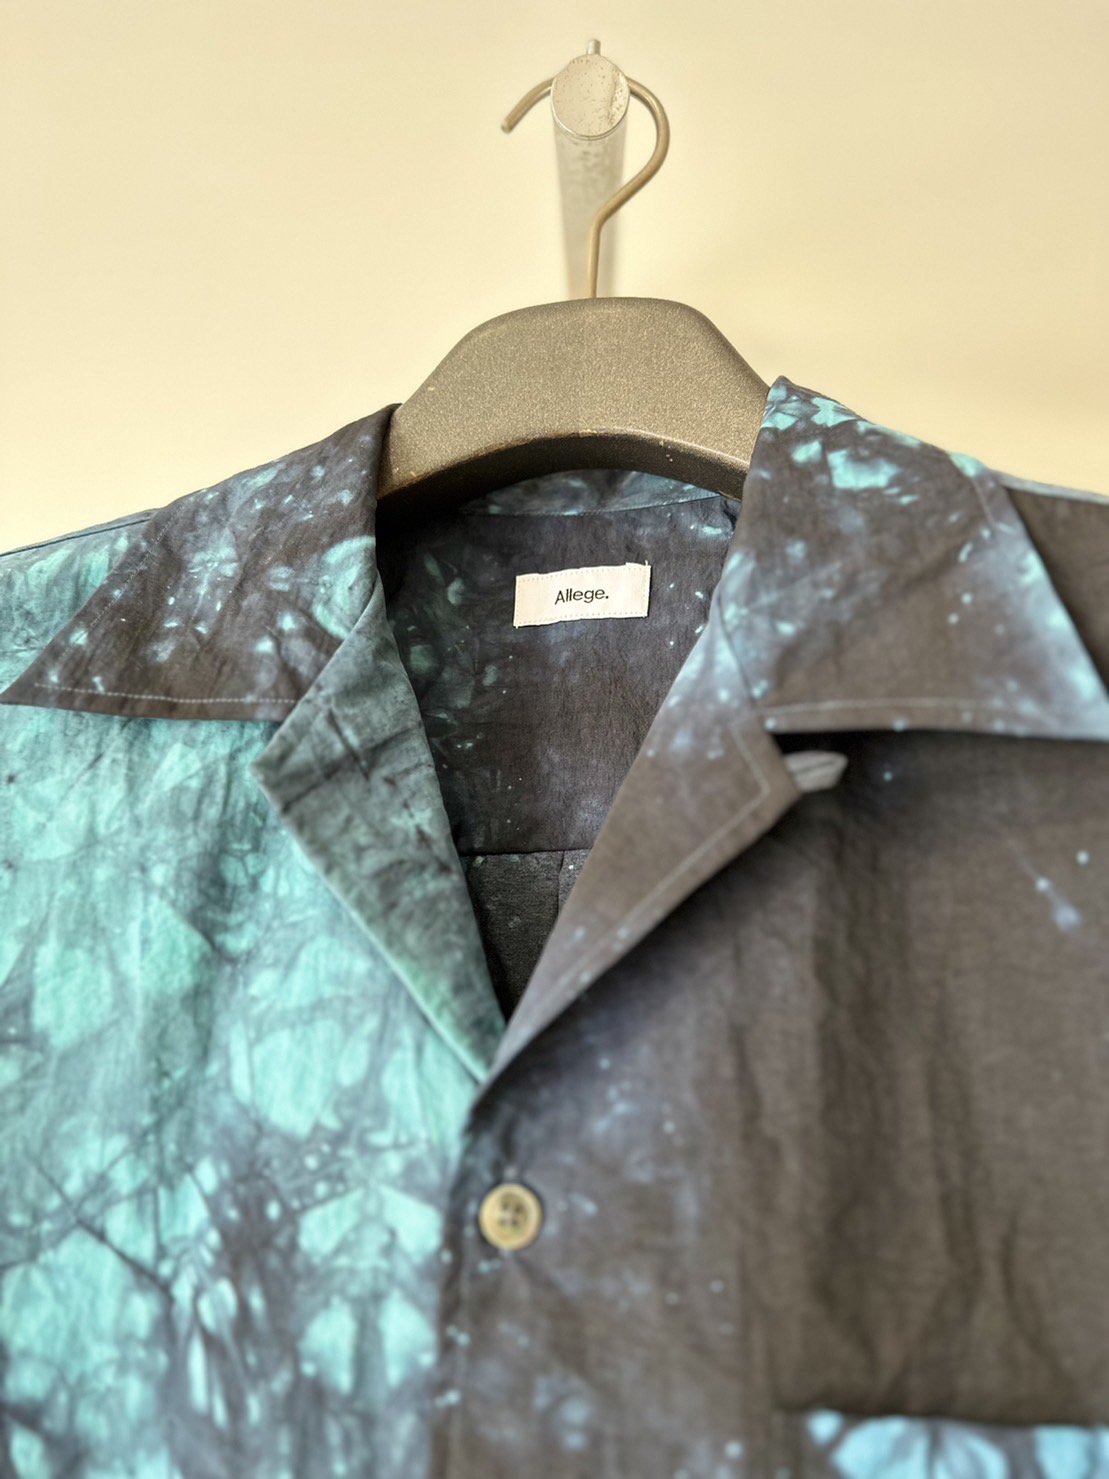 ALLEGE<br />Kago Dyed Open Callor S/S Shirt / Blue<img class='new_mark_img2' src='https://img.shop-pro.jp/img/new/icons14.gif' style='border:none;display:inline;margin:0px;padding:0px;width:auto;' />